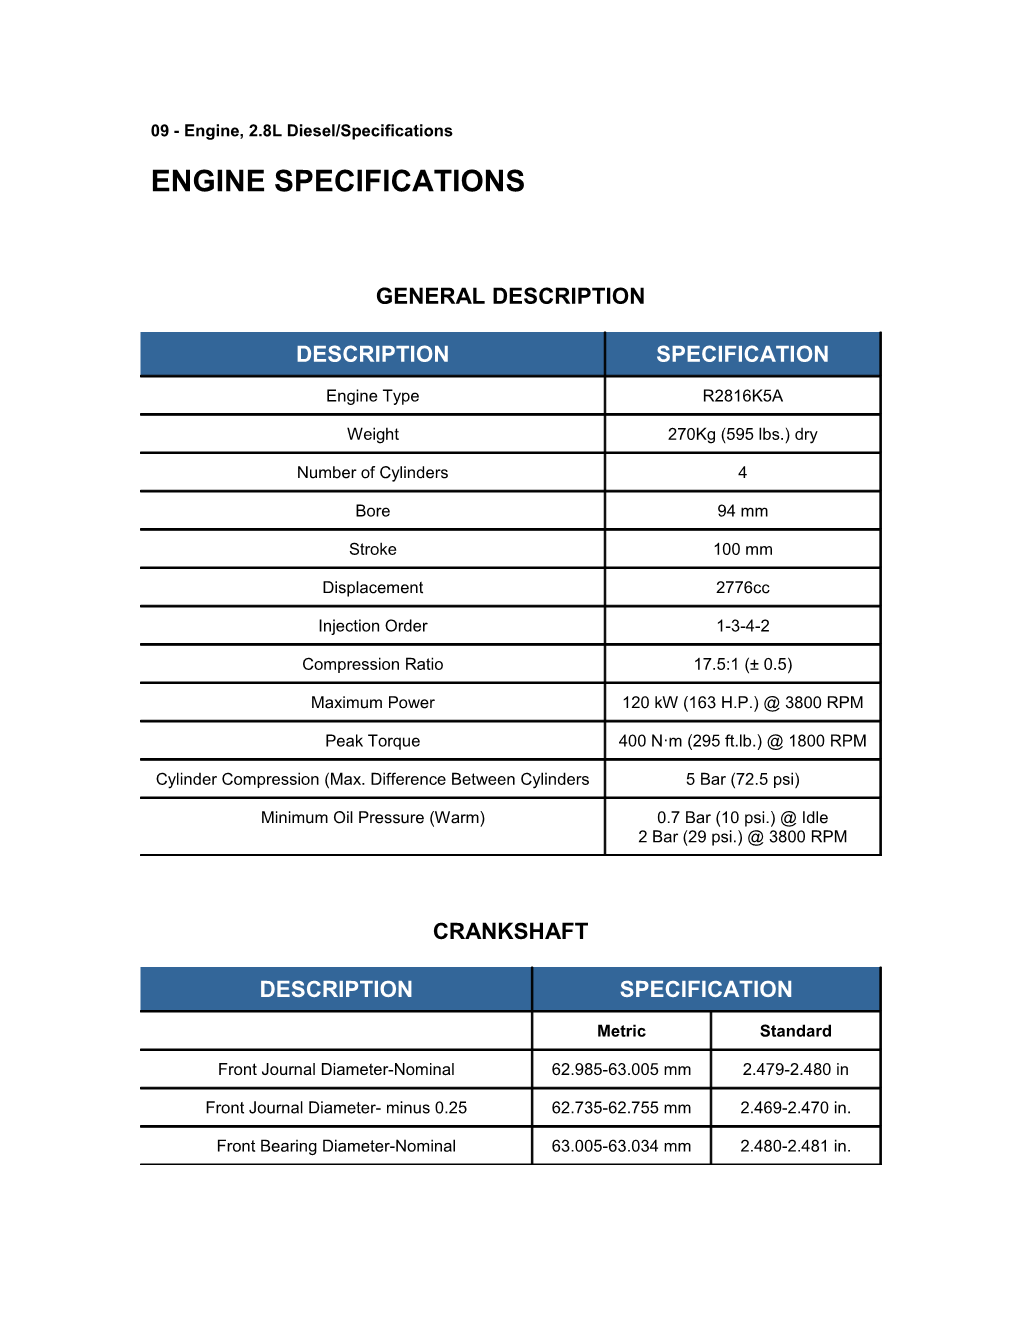 09 - Engine, 2.8L Diesel/Specifications